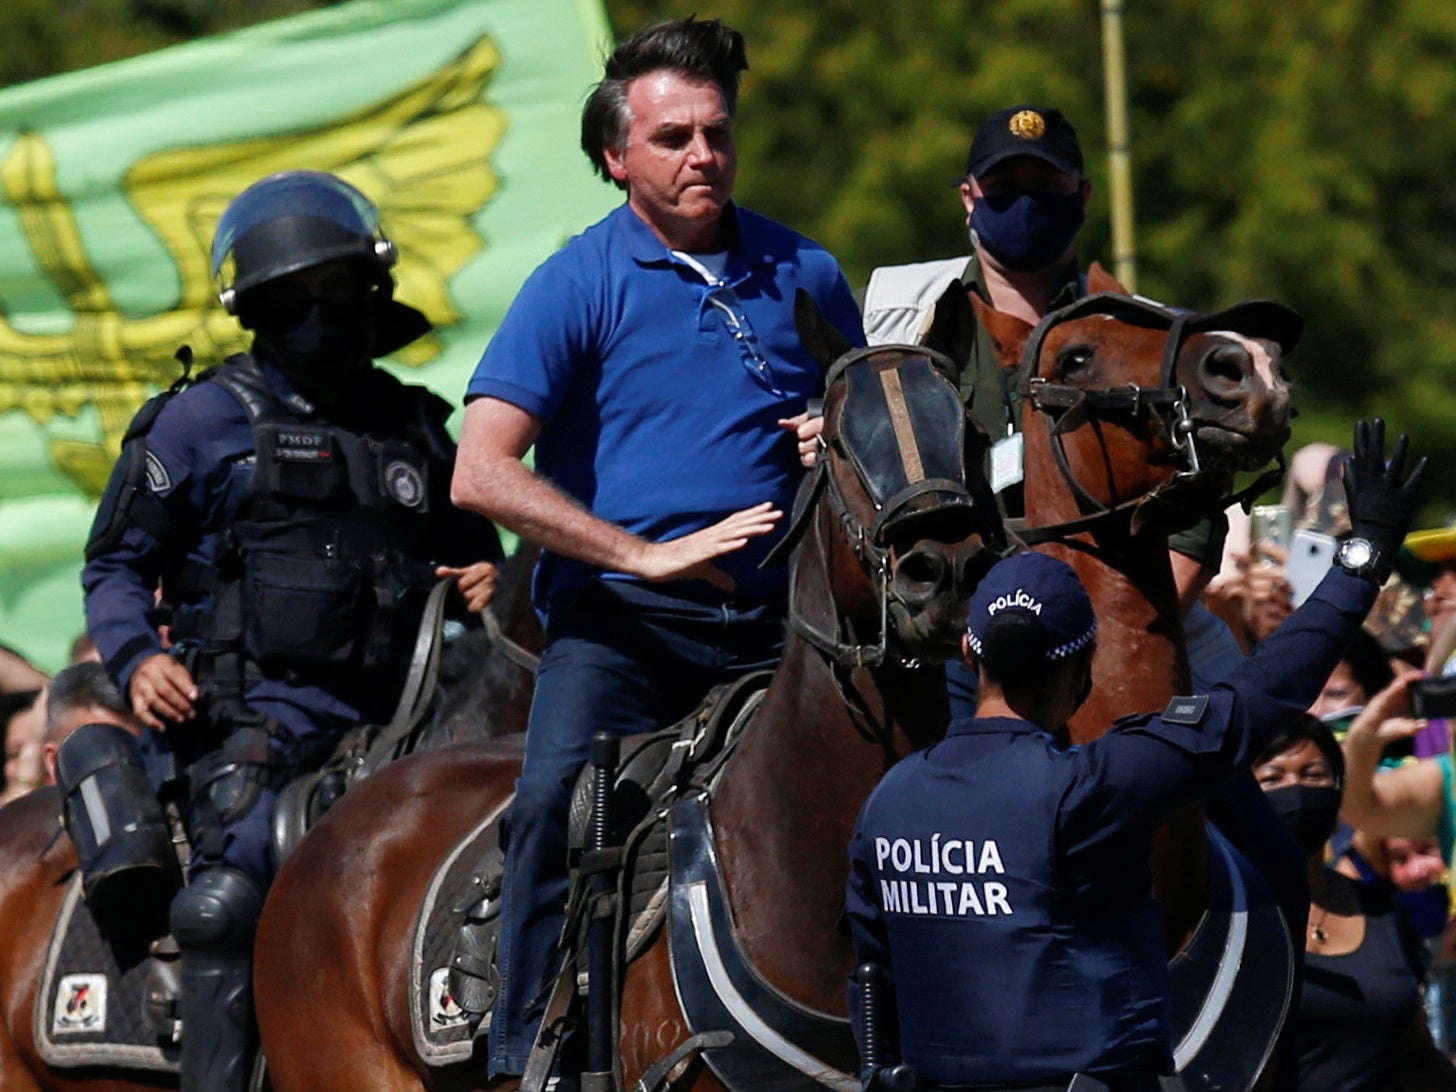 Jair Bolsonaro rides a horse during a demonstration by his supporters in Brasilia, 31 May